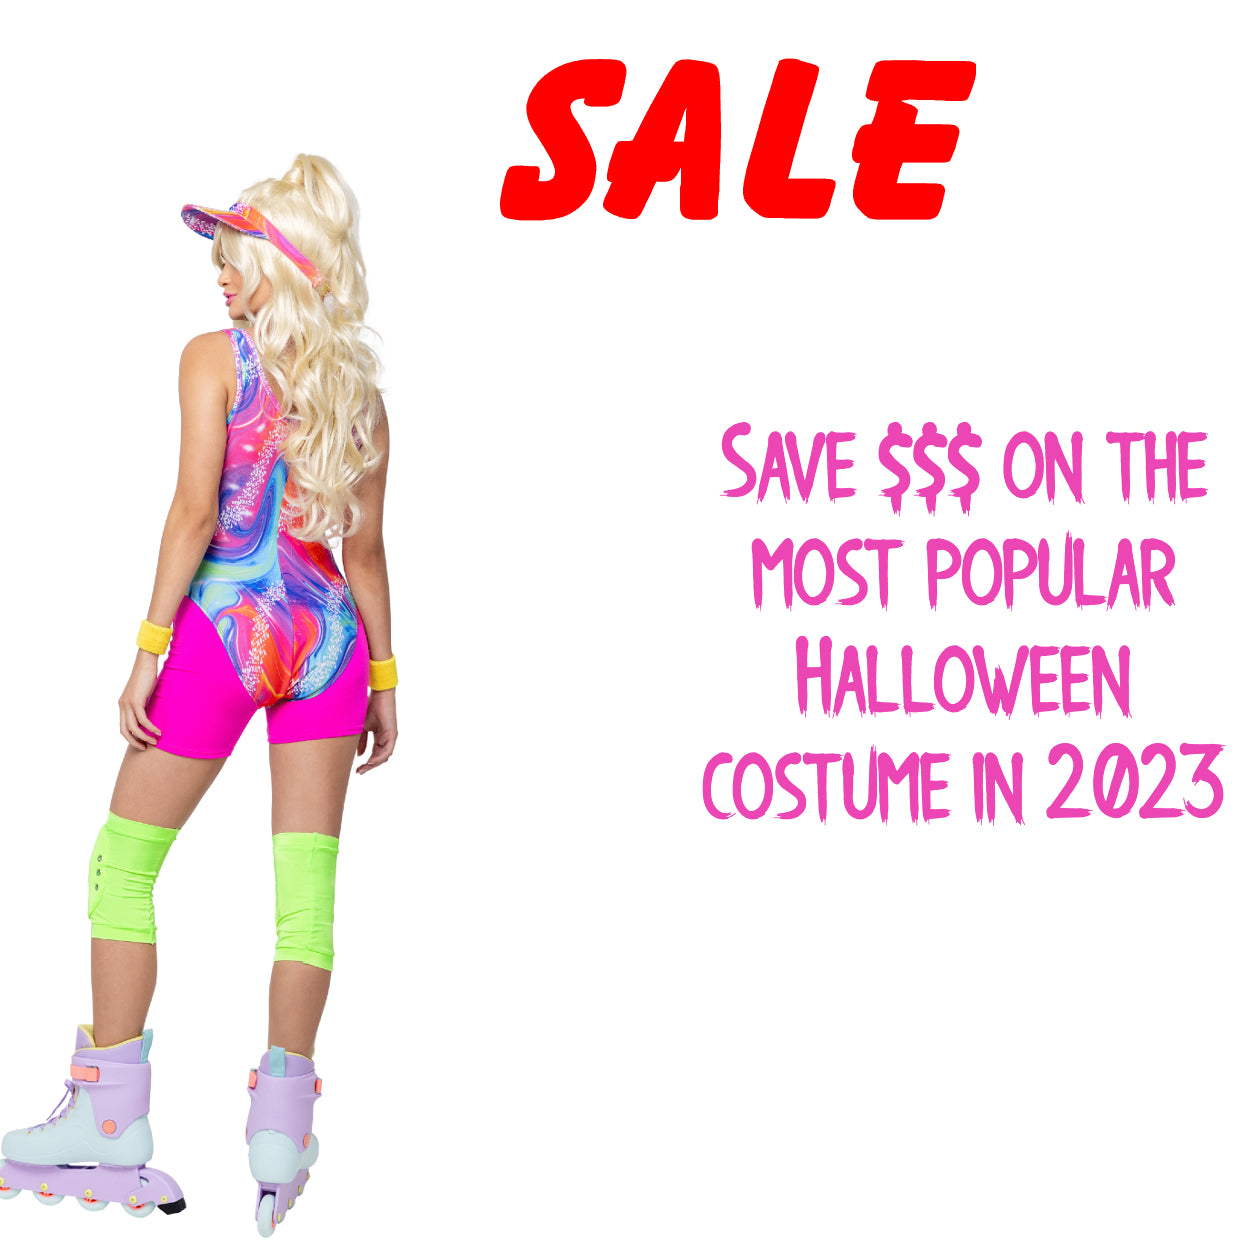 Rollerblade Barbie 5 Piece Set Costume by ROMA in Size Small or Medium